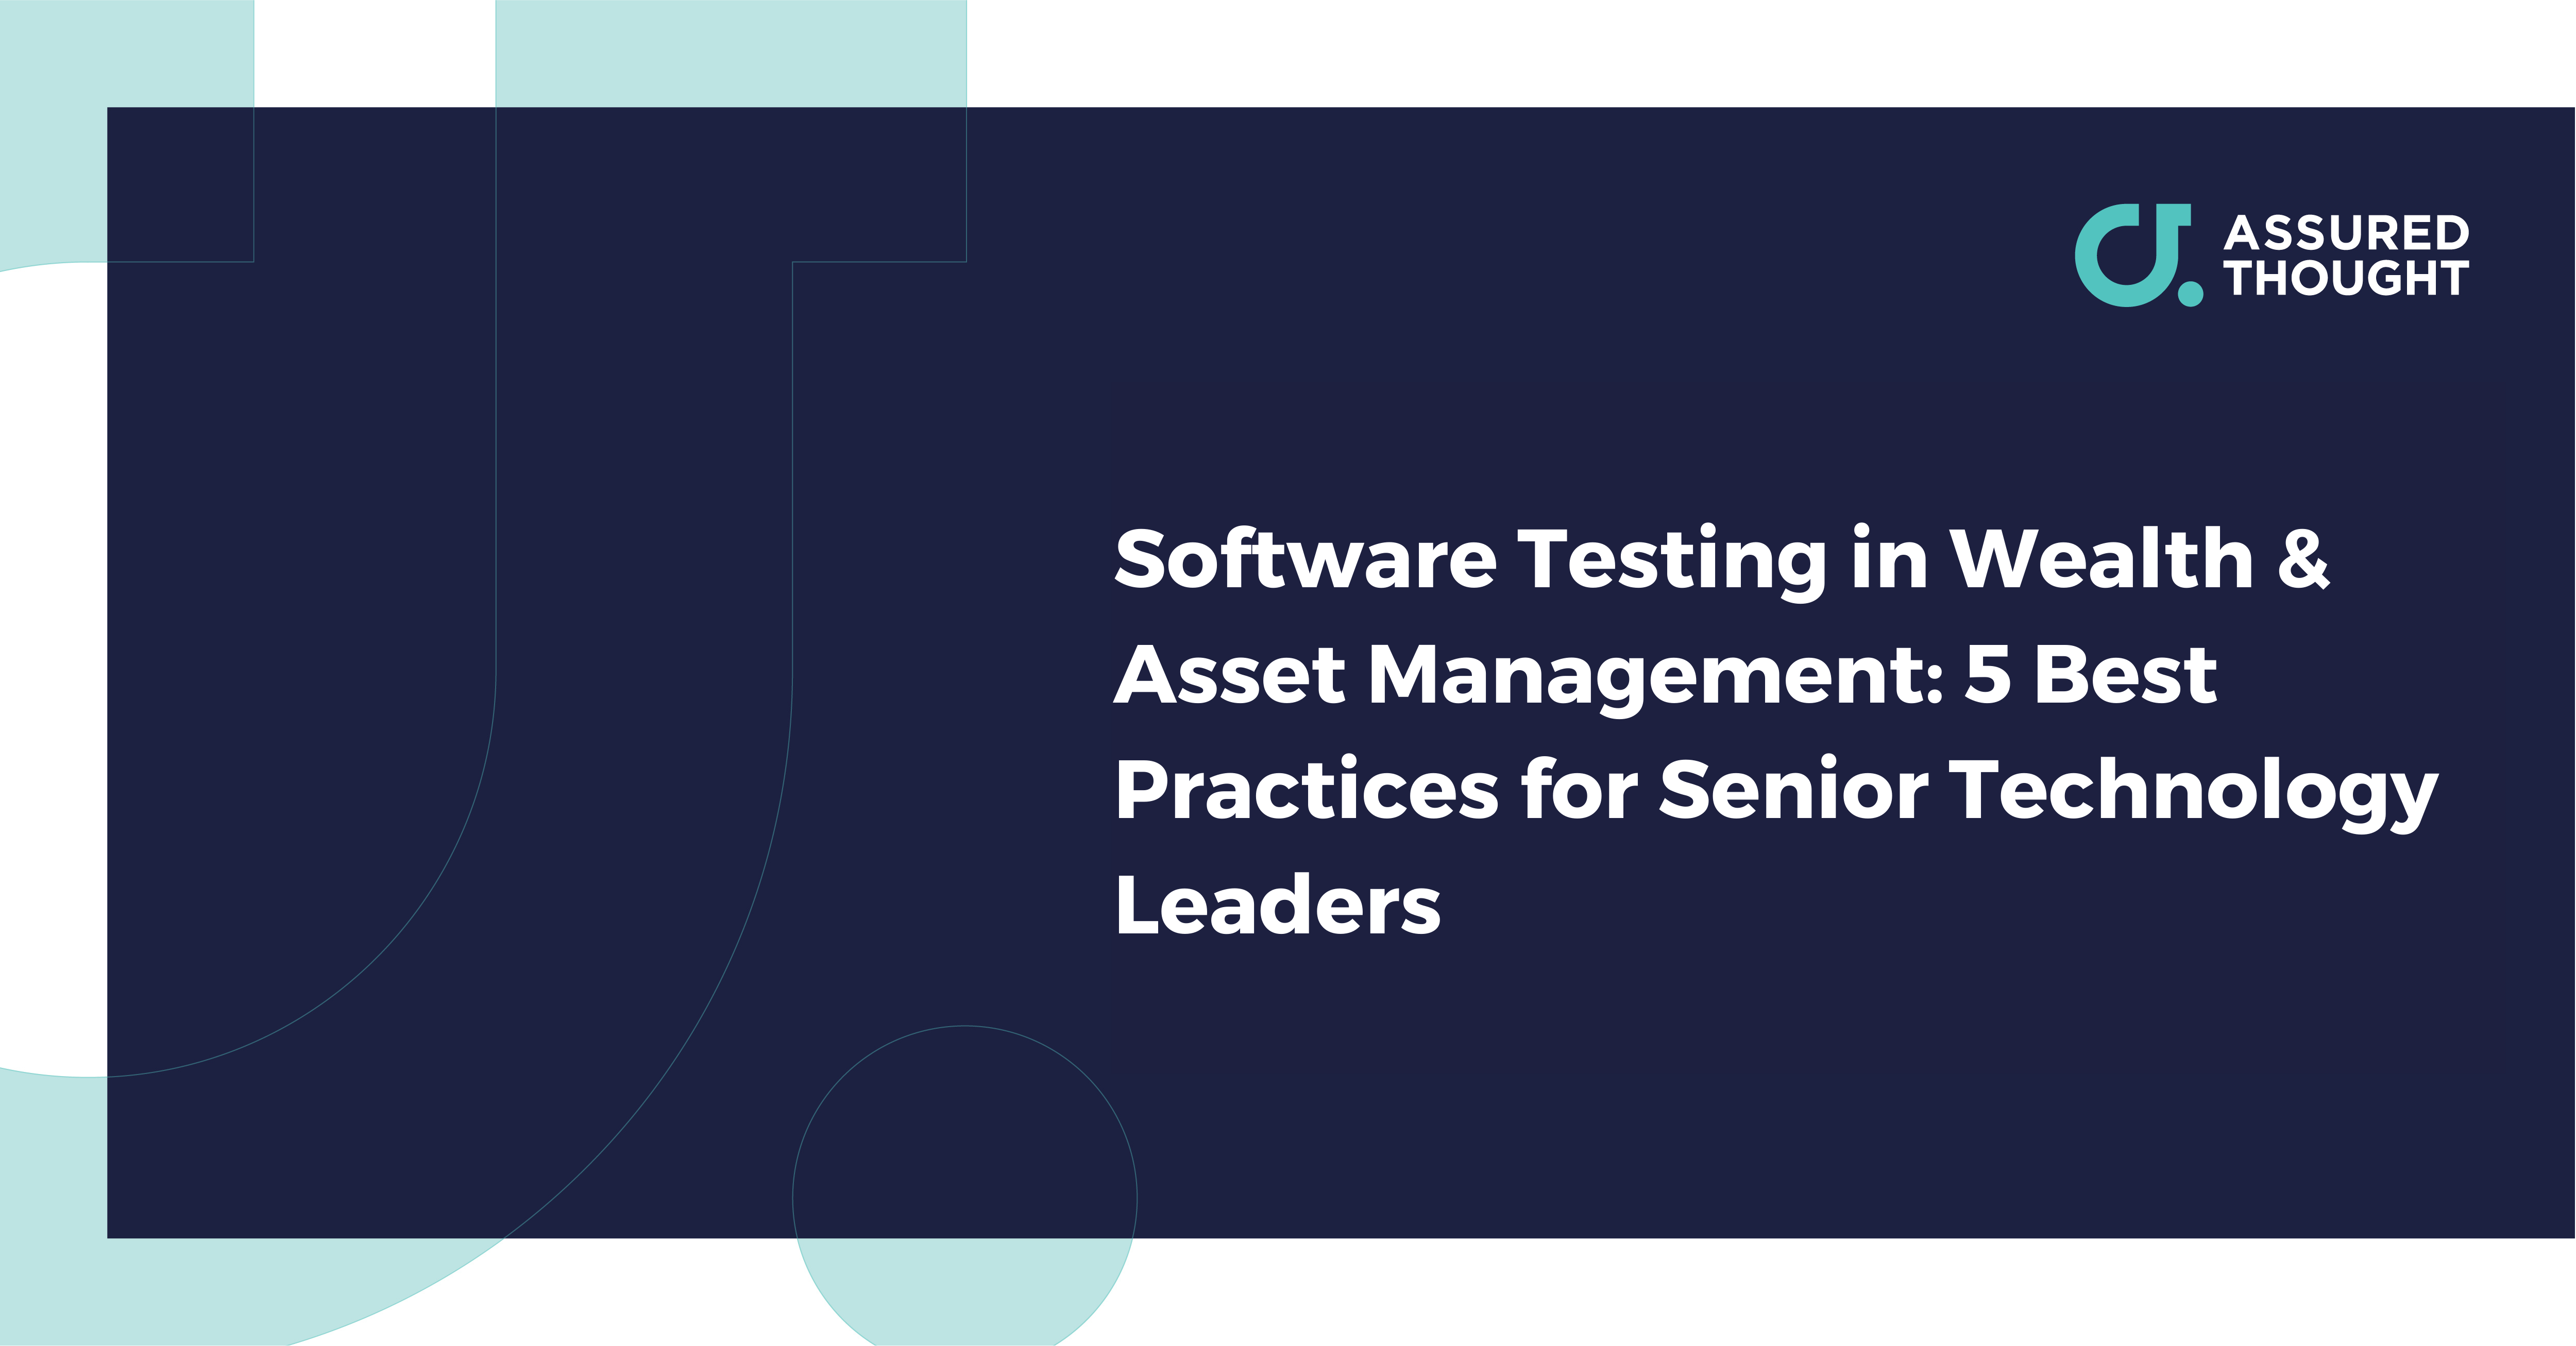 Software Testing in Wealth & Asset Management: 5 Best Practices for Senior Technology Leaders